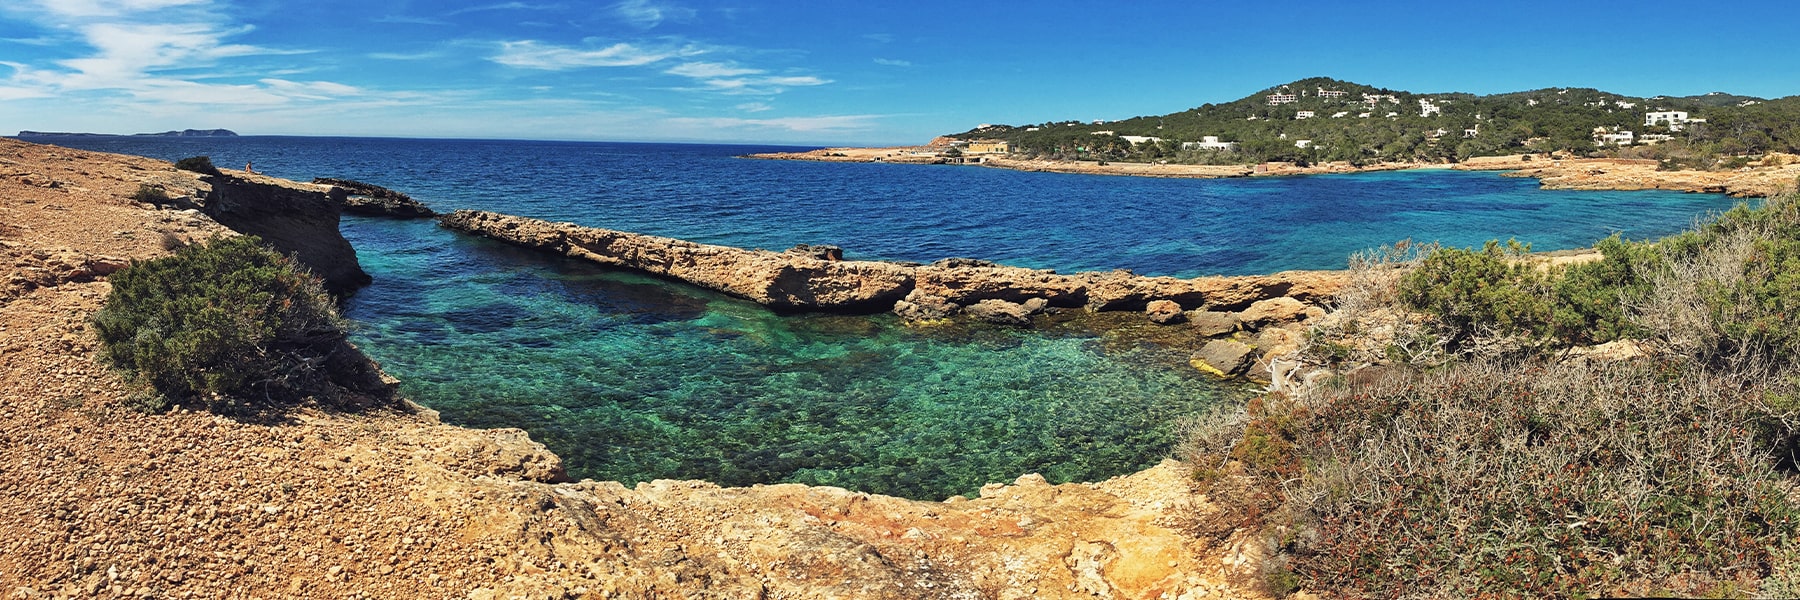 Photo of bright blue beach appears Mediterranean taken by student abroad Claudia Gonzalez.